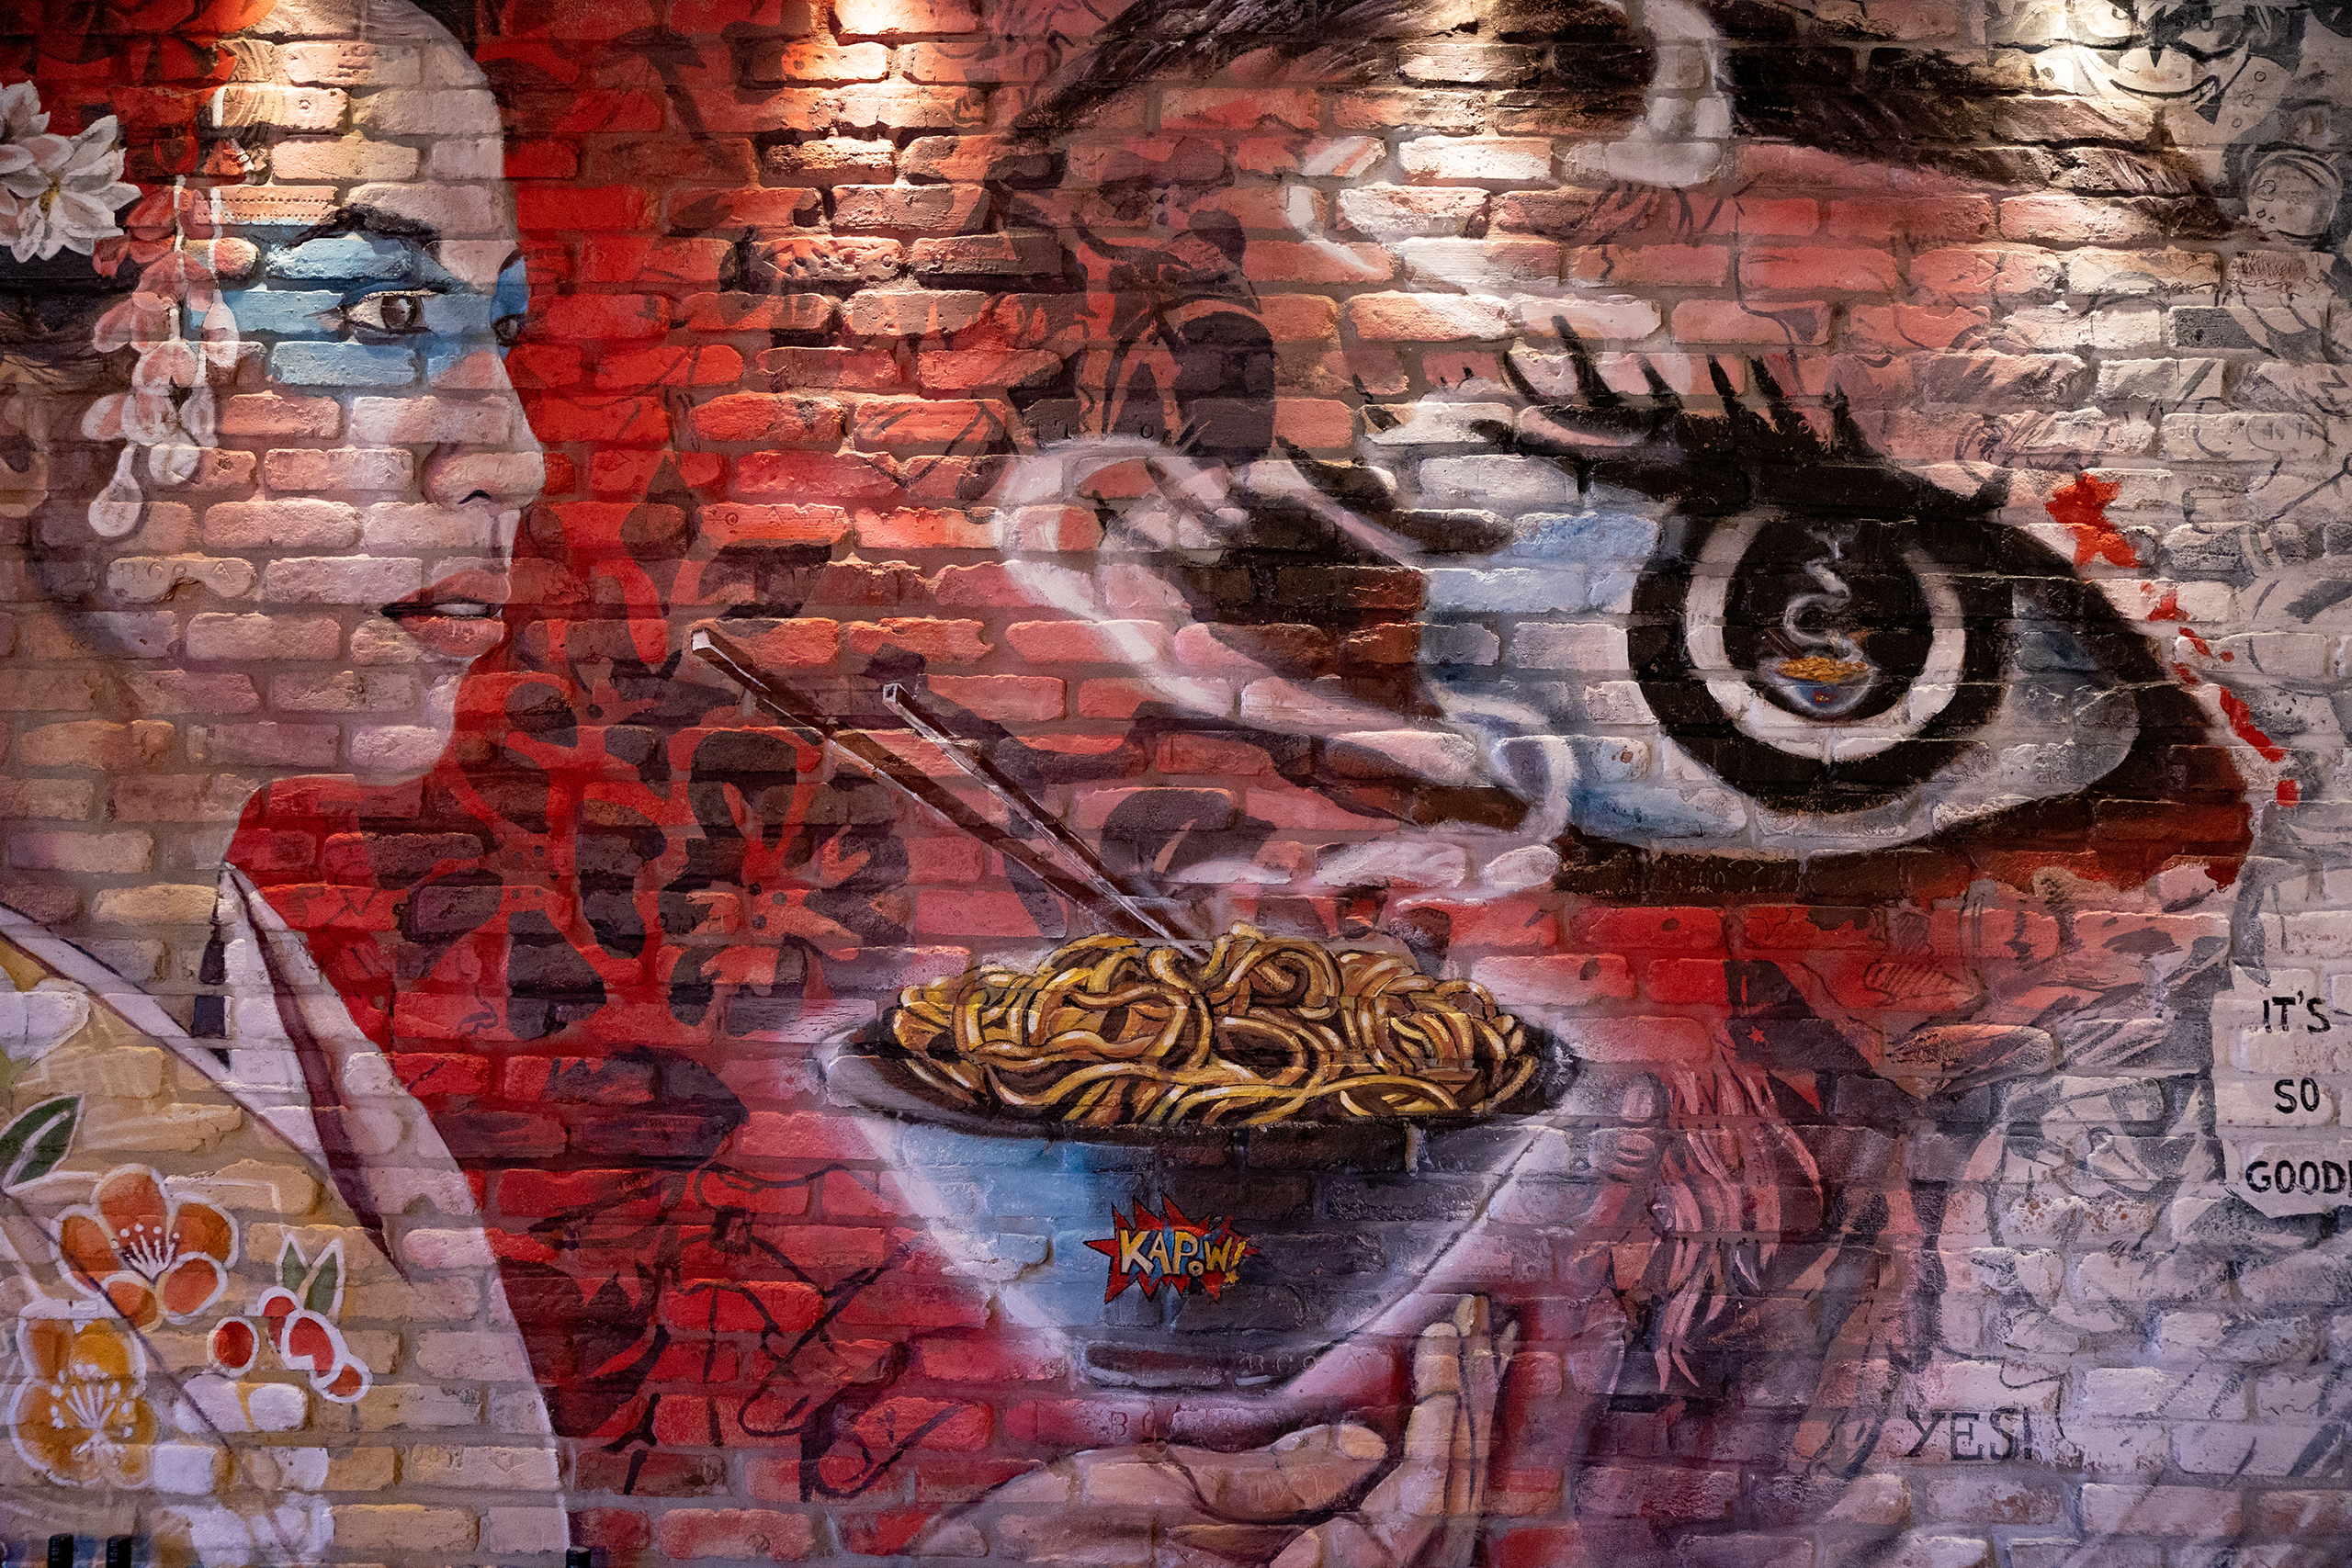 A mural, painted on exposed brick, with a red theme, an eye, and a woman holding a bowl of ramen.